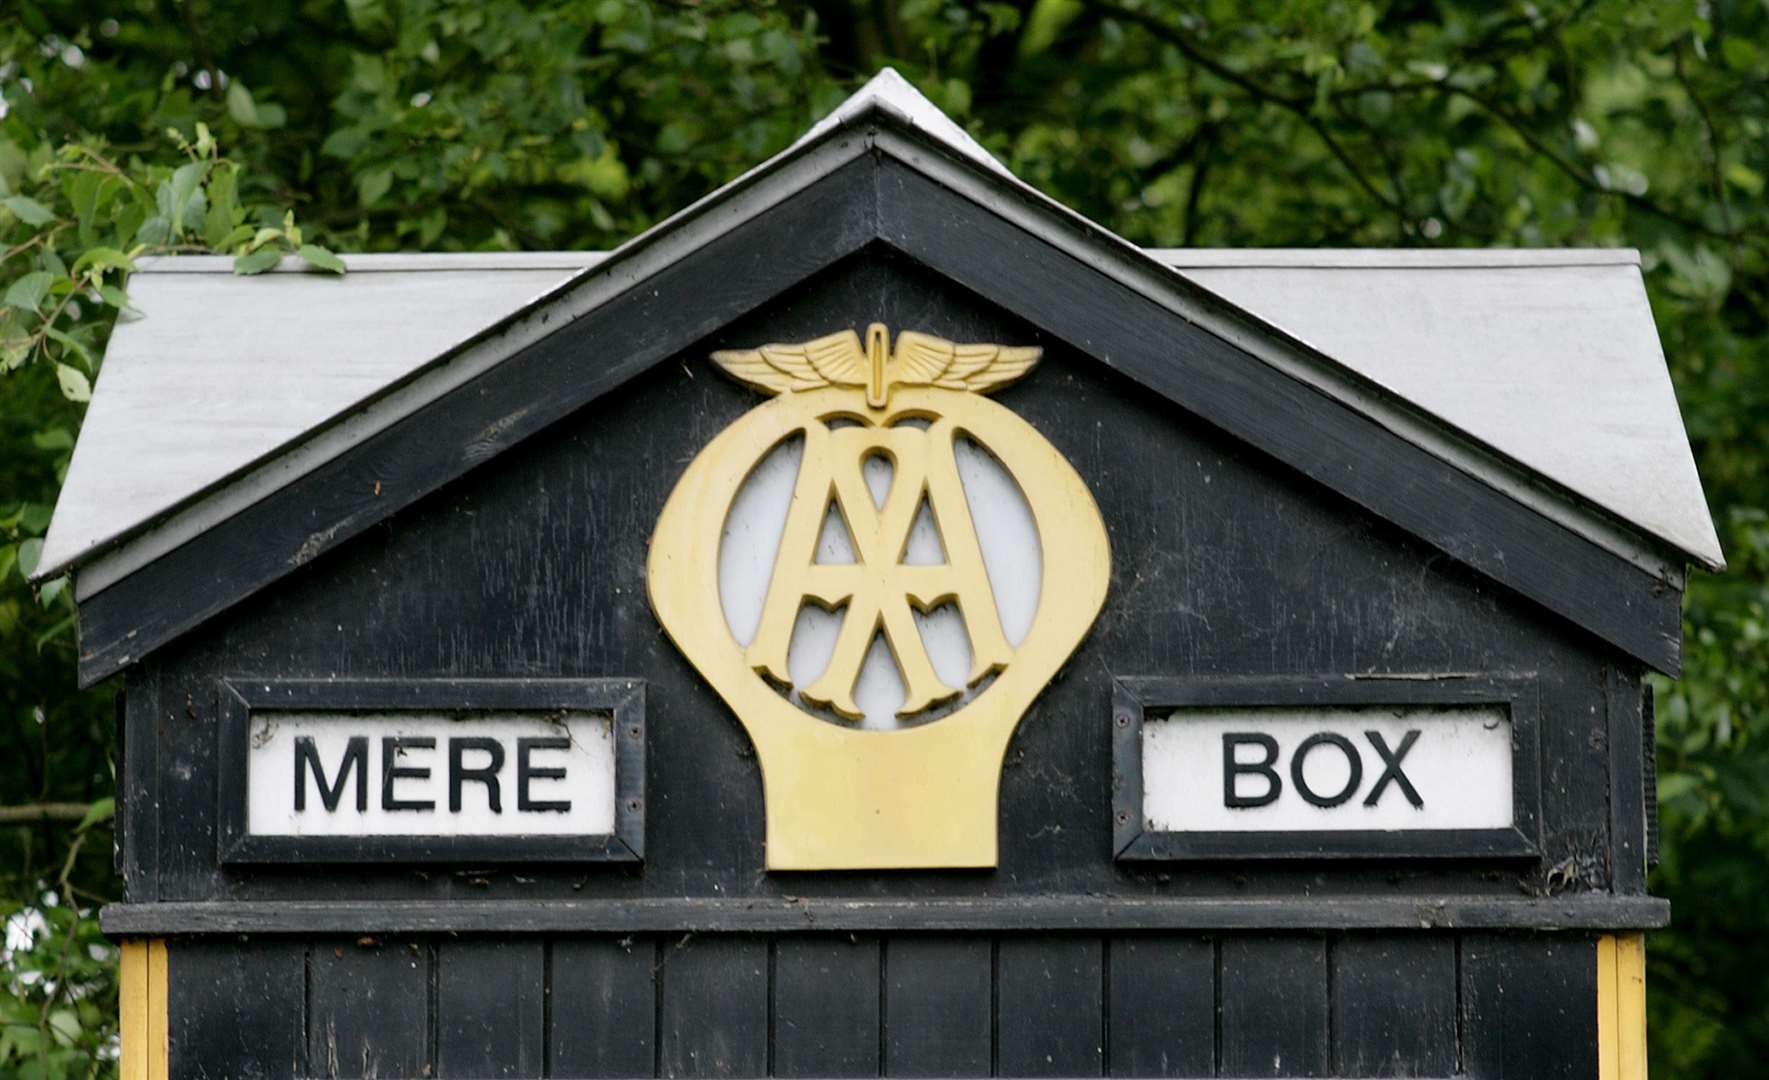 The AA was first founded in the UK in 1905 and had call boxes across the country for motorists (Anthony Devlin/PA)